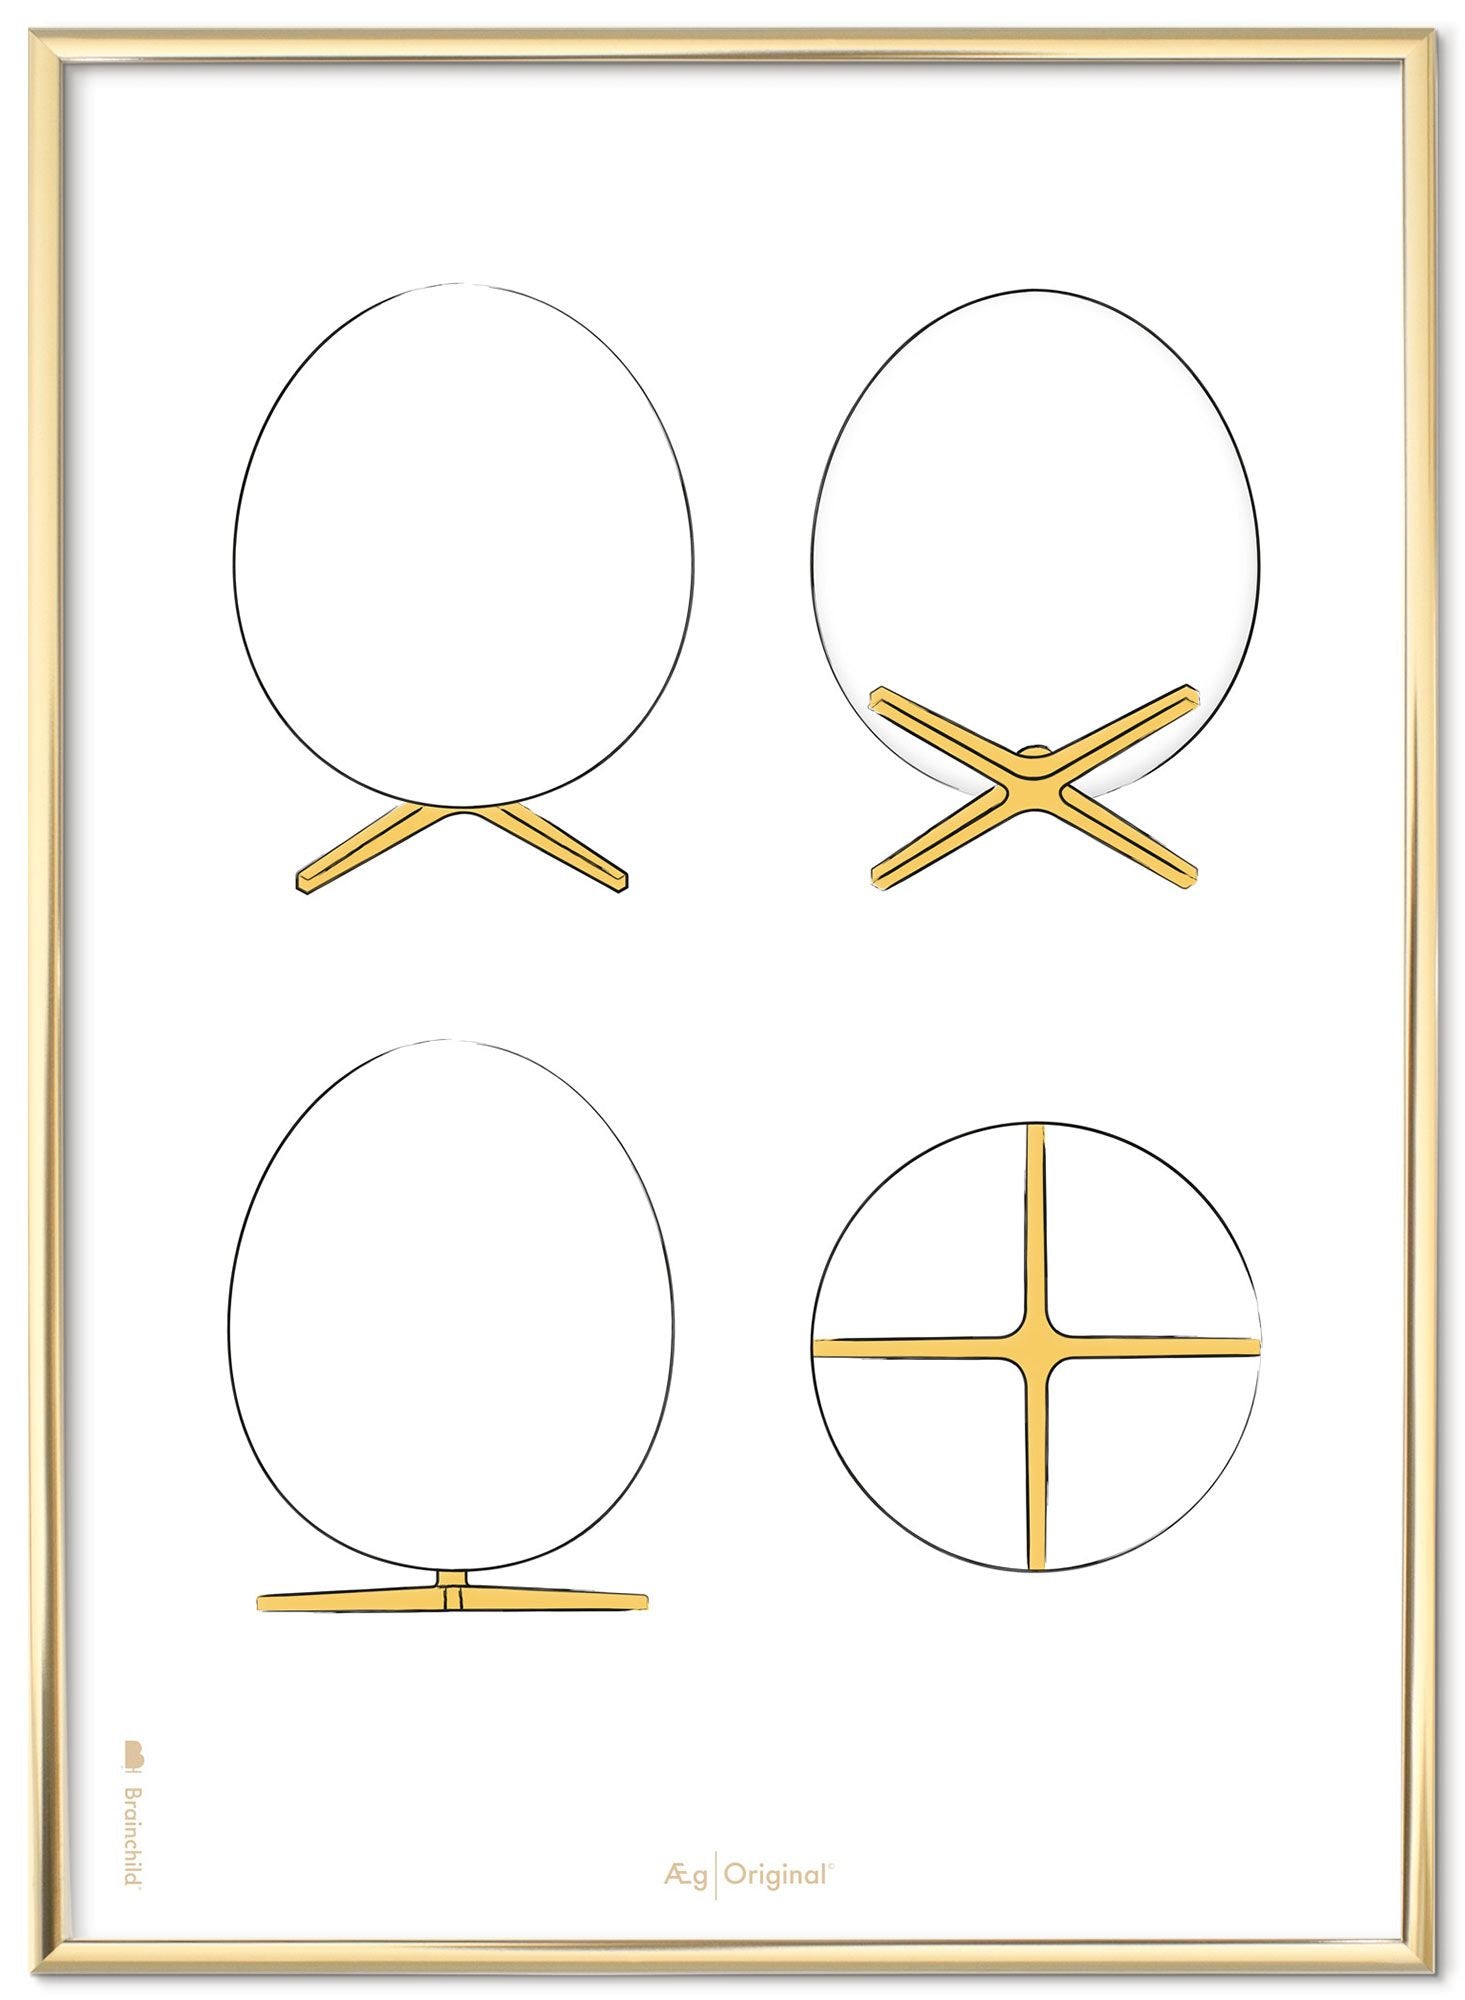 Brainchild The Egg Design Sketches Poster Frame Made Of Brass Colored Metal 70x100 Cm, White Background